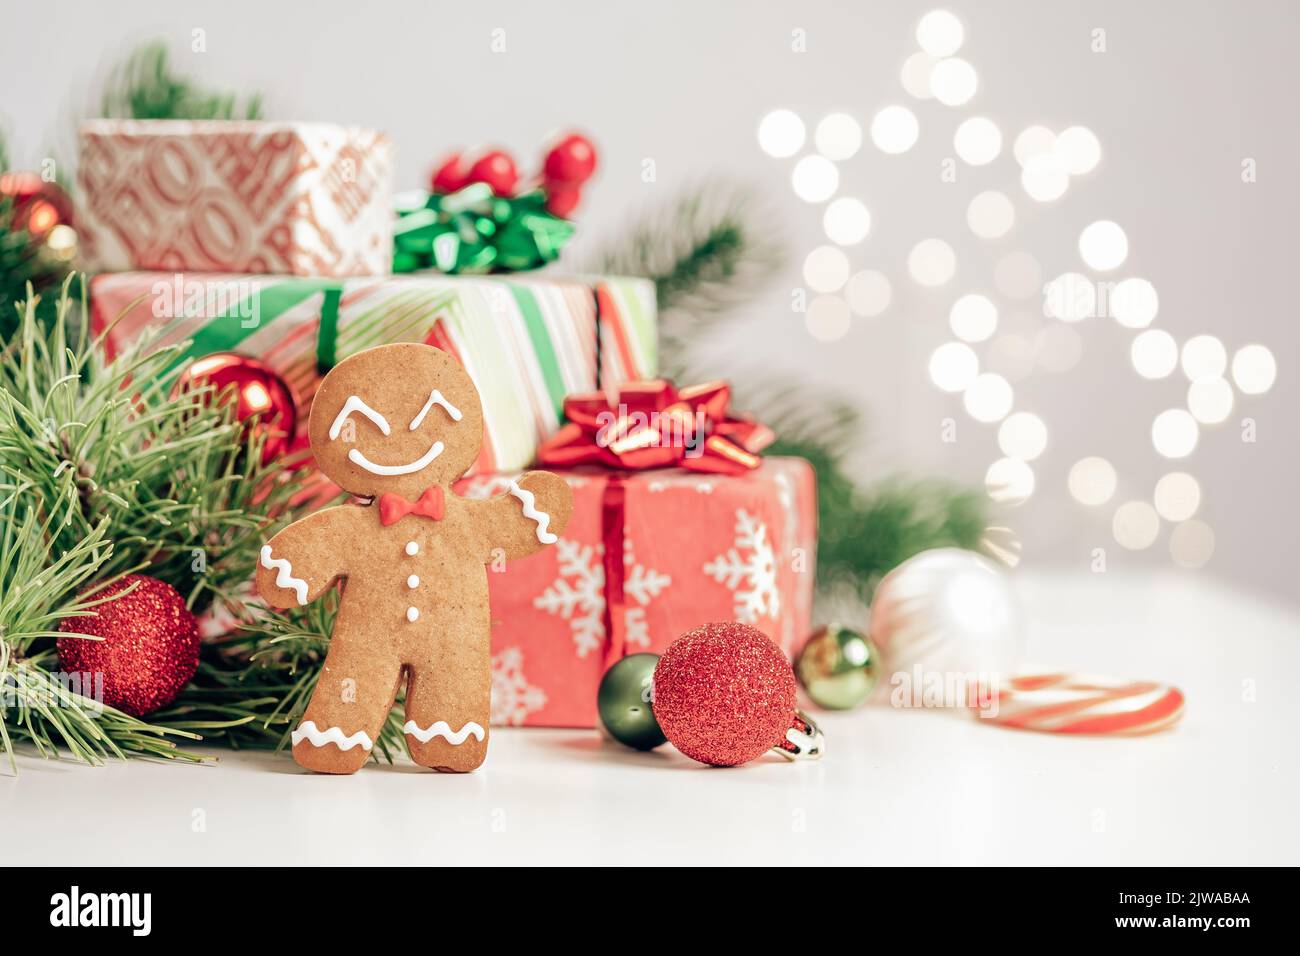 Christmas Decorations with Gingerbread man and Gift Box Stock Photo